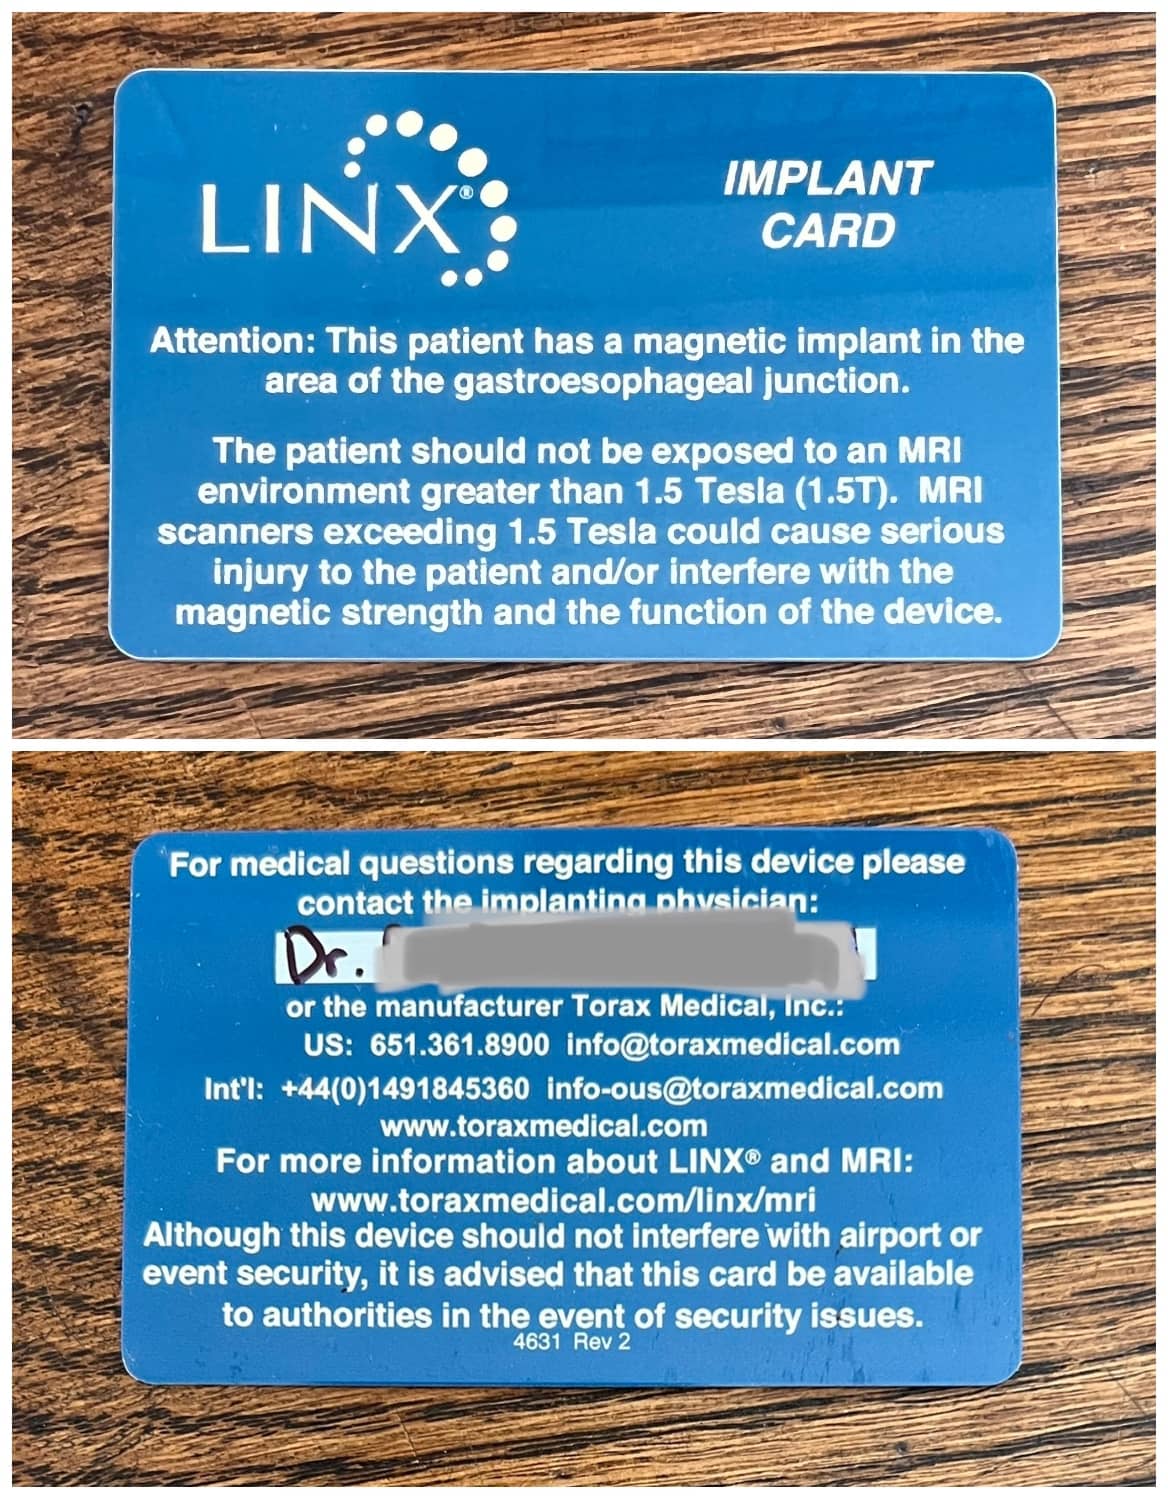 photo of a LINX device implant card front and back. 